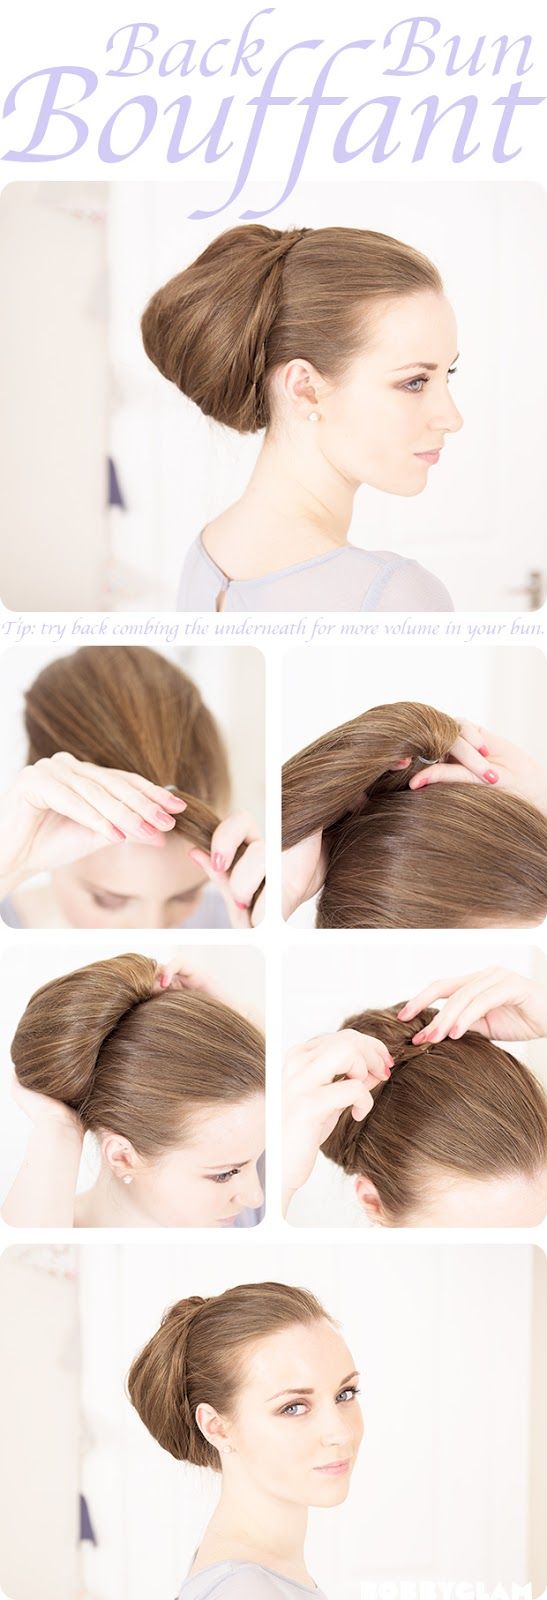 5 Bouffant Hairstyle Tutorials for a Glamorous Look